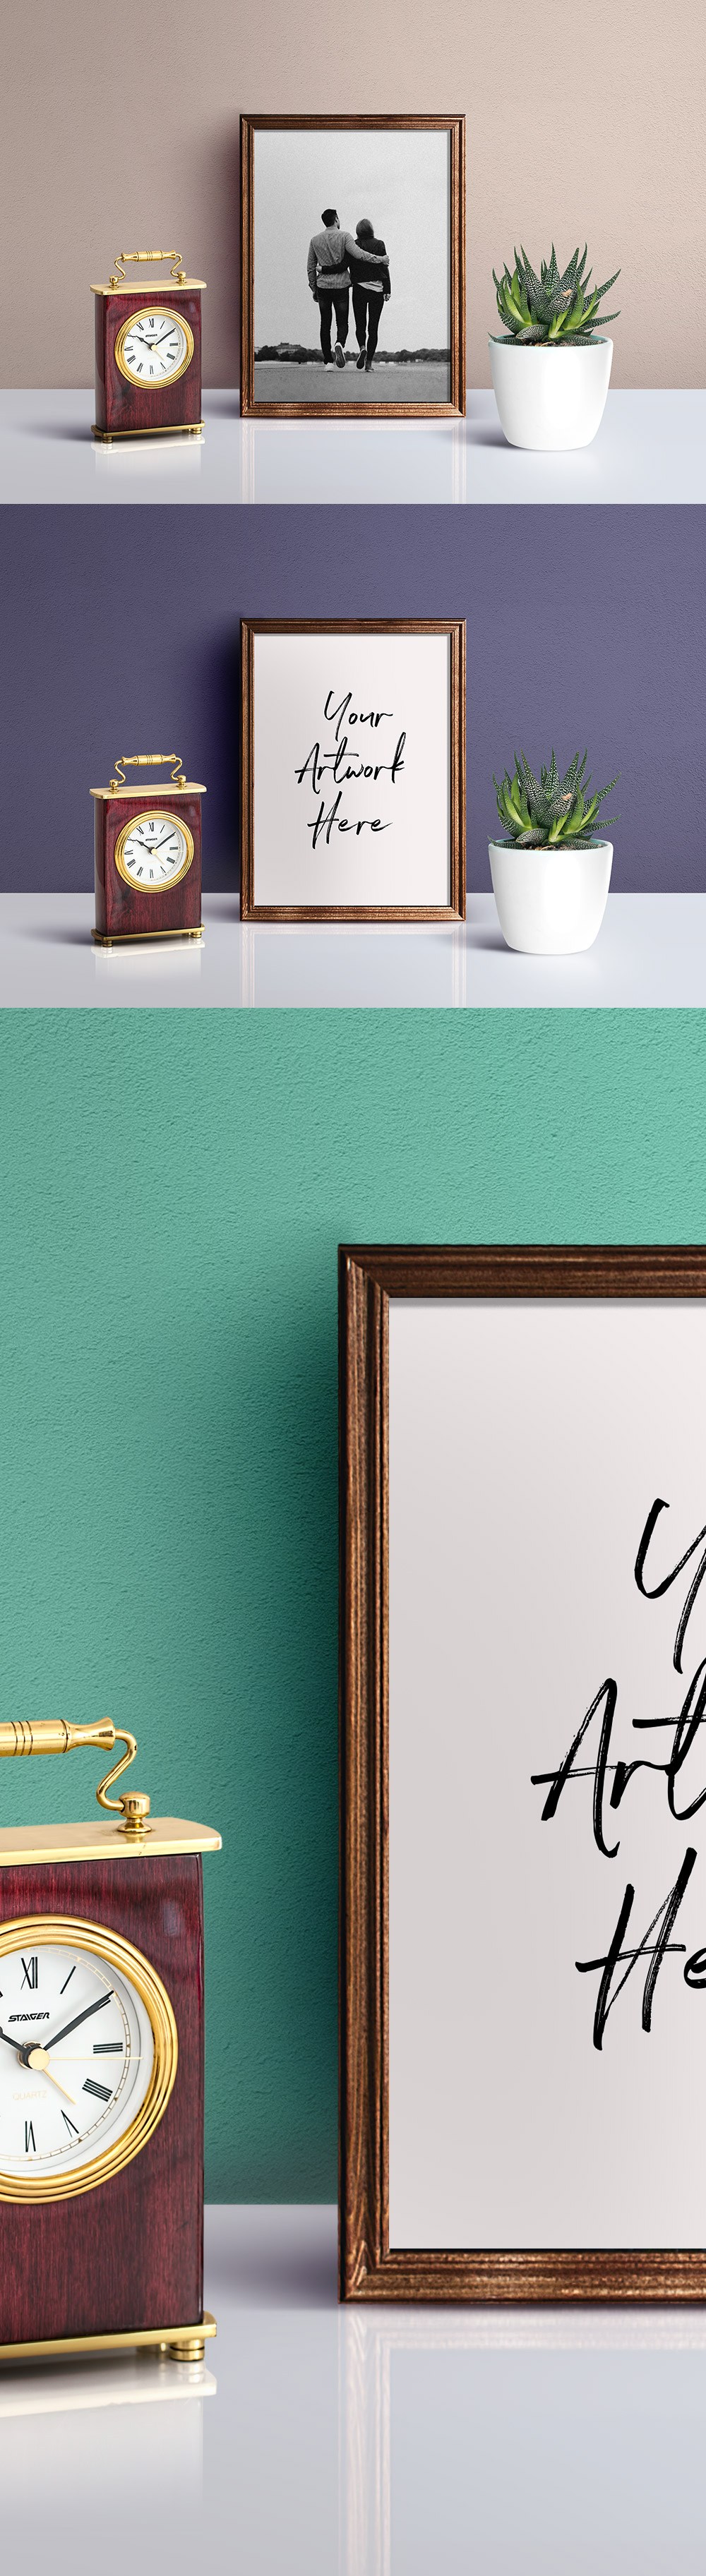 Picture Frame Mockup PSD | Free PSD Templates